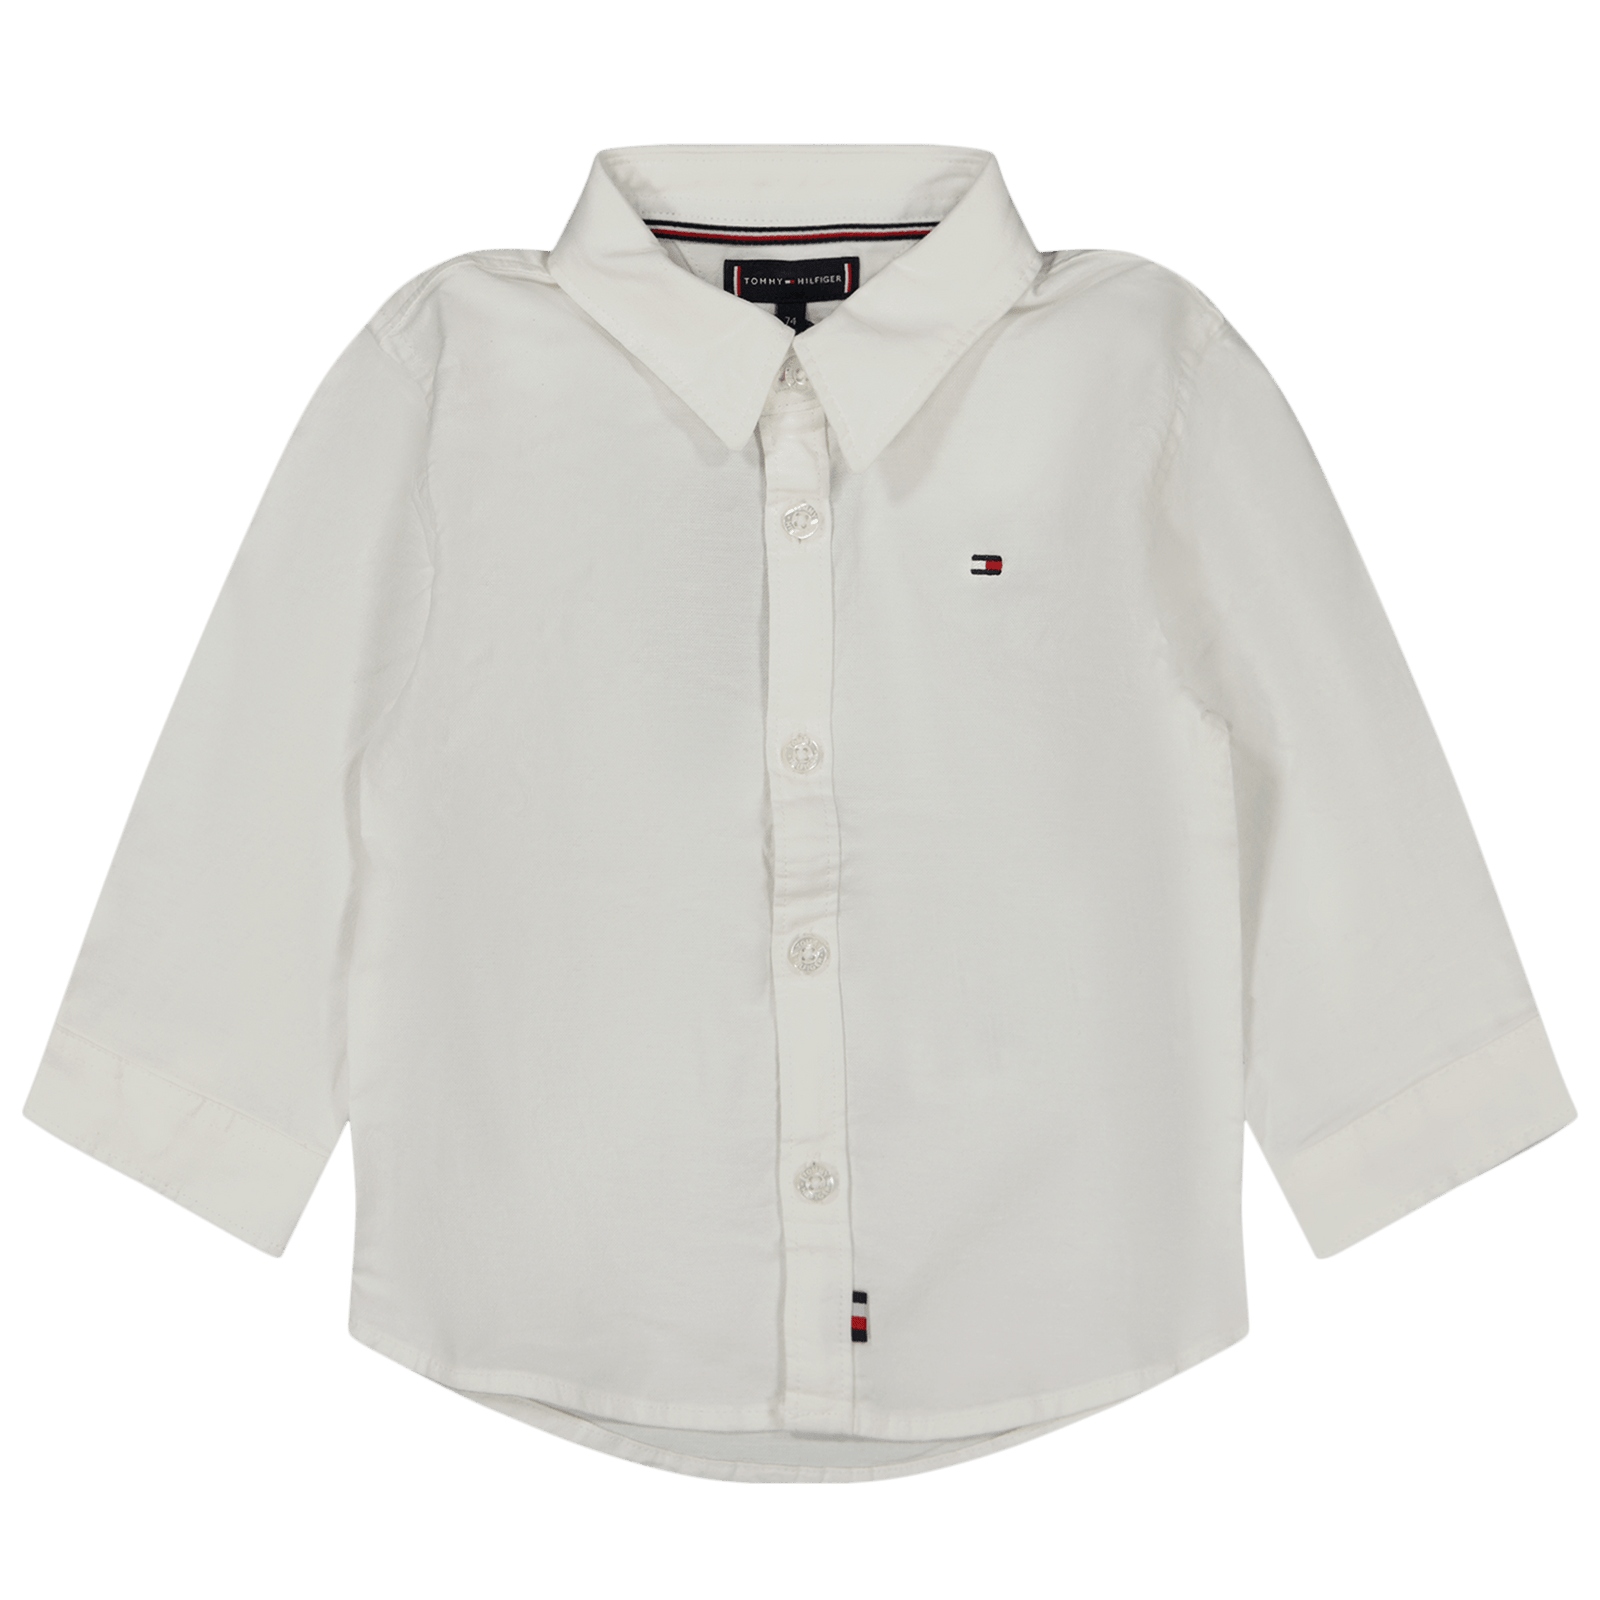 Tommy Hilfiger Baby Boys Blouse White